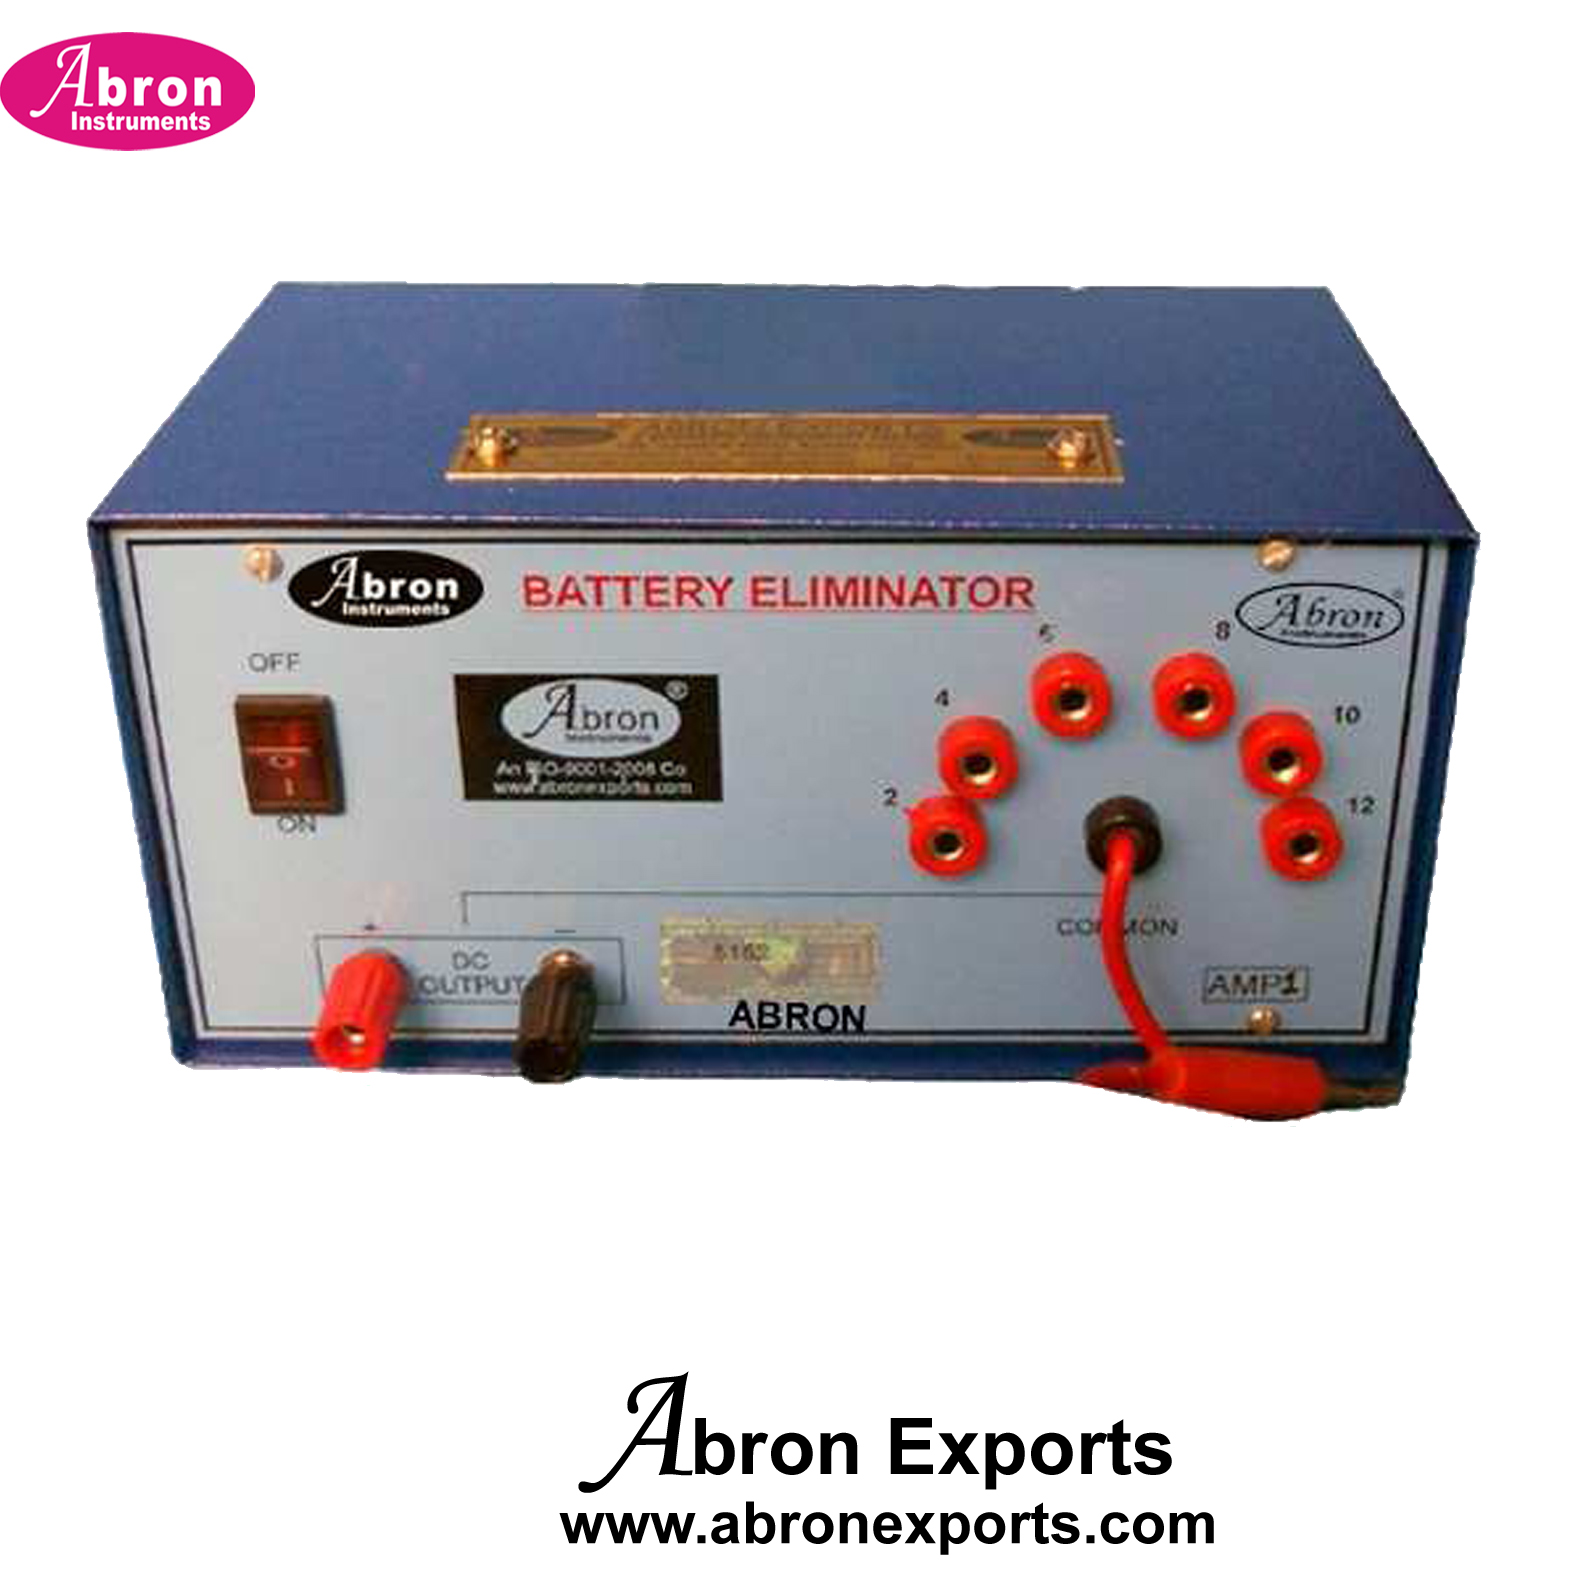 Battery Eliminator Stablized regulated output in 2Amp AE-1205-S2